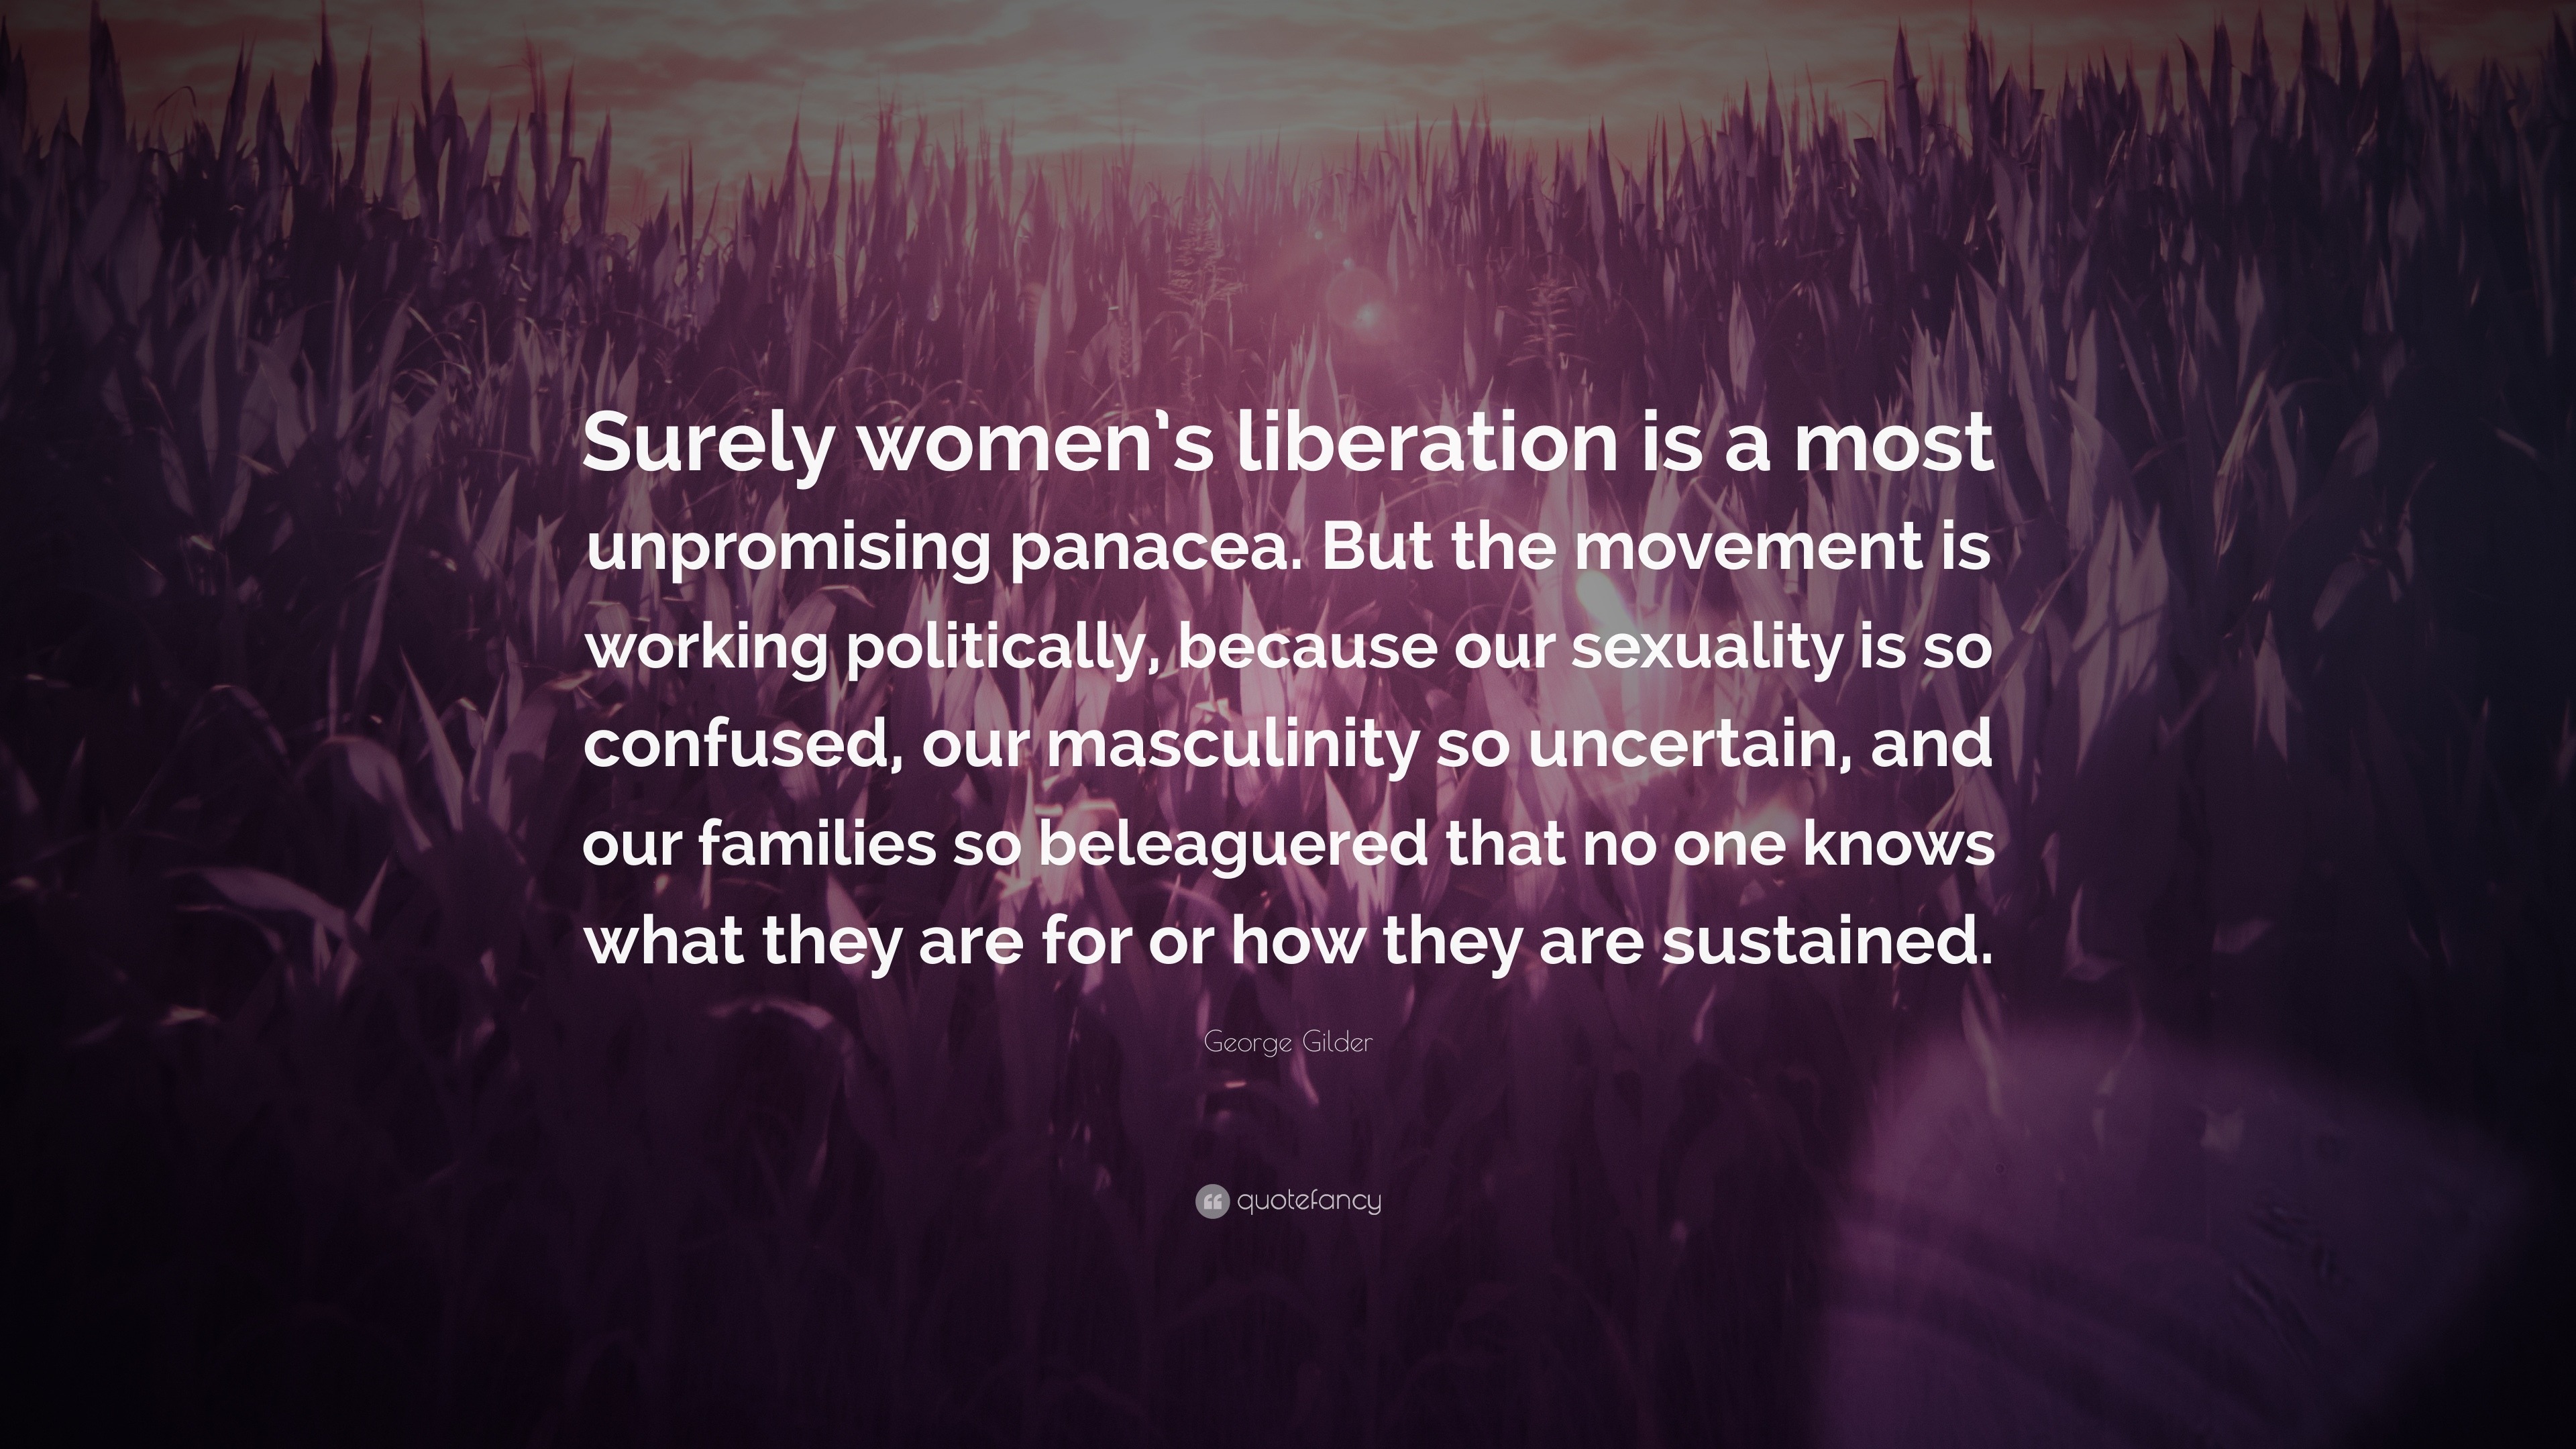 George Gilder Quote: “Surely women’s liberation is a most unpromising ...